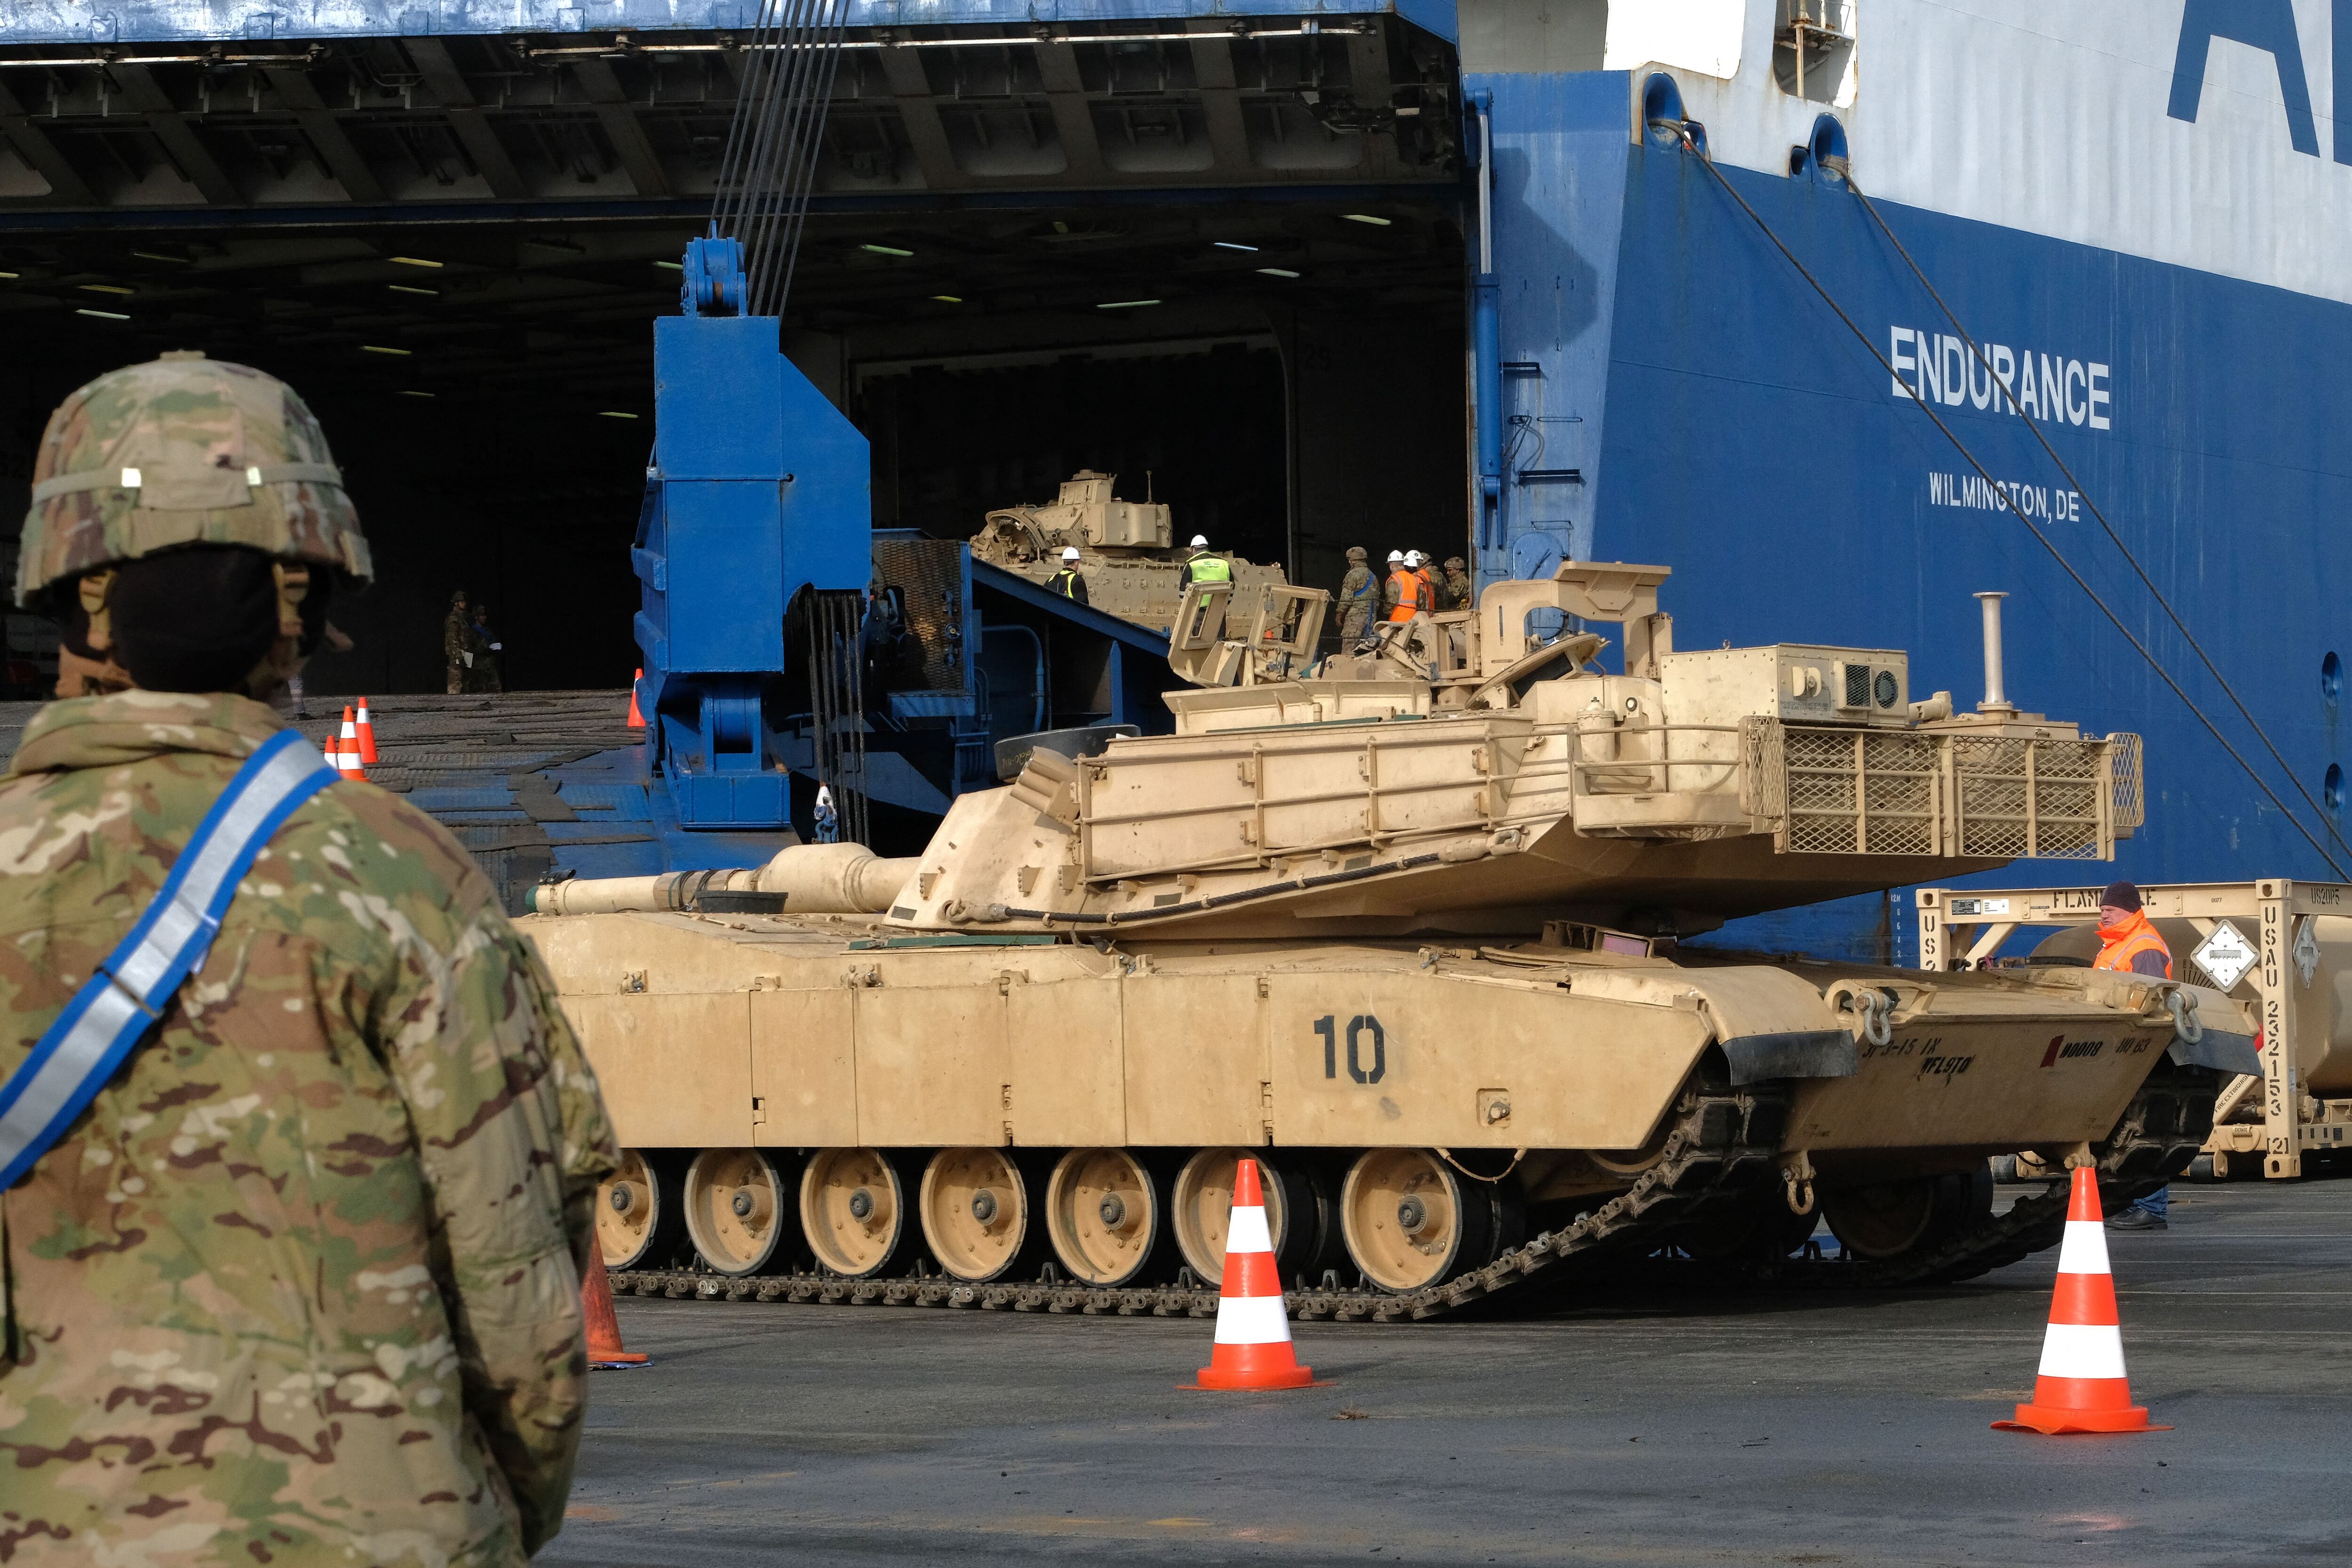 Military personnel unload an M1 Abrams battle tank at the port of Bremerhaven, United States, on February 21, 2020. (Photo by Patrik Stollarz/AFP).